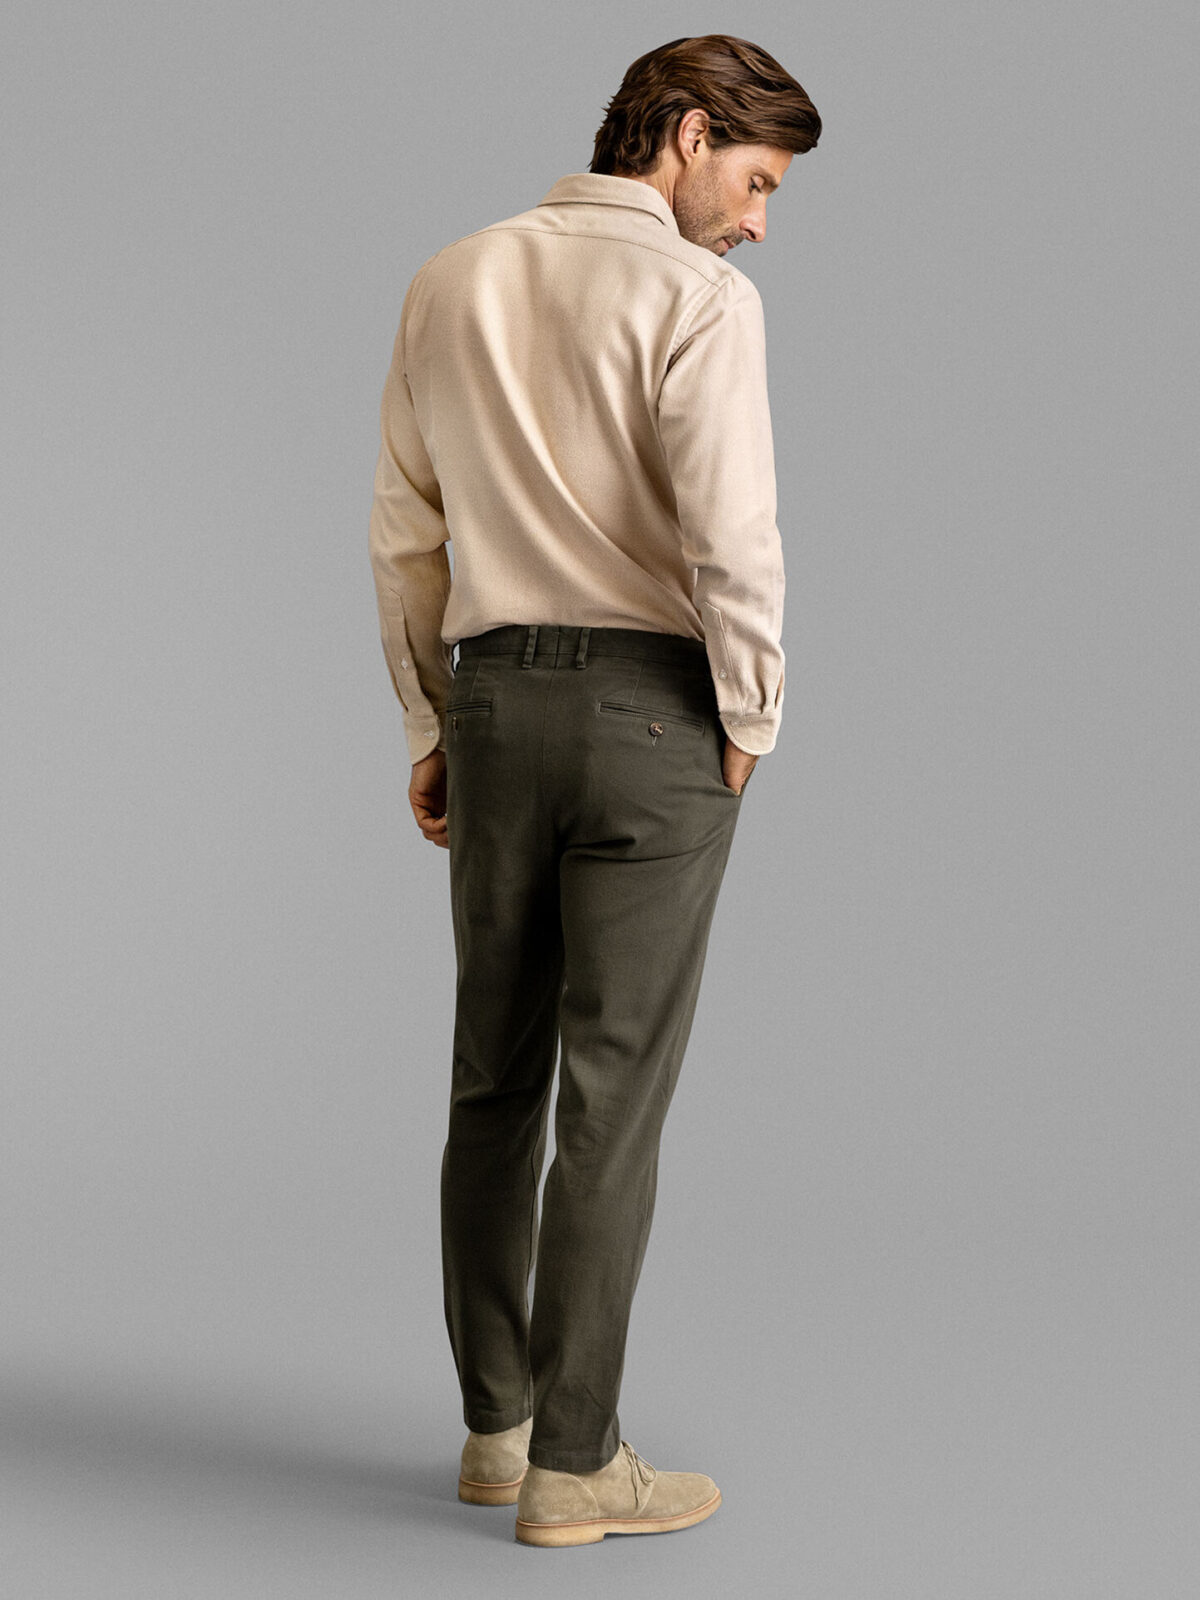 Brenta Olive Pants Brushed Stretch Chino Cotton Custom Fit 